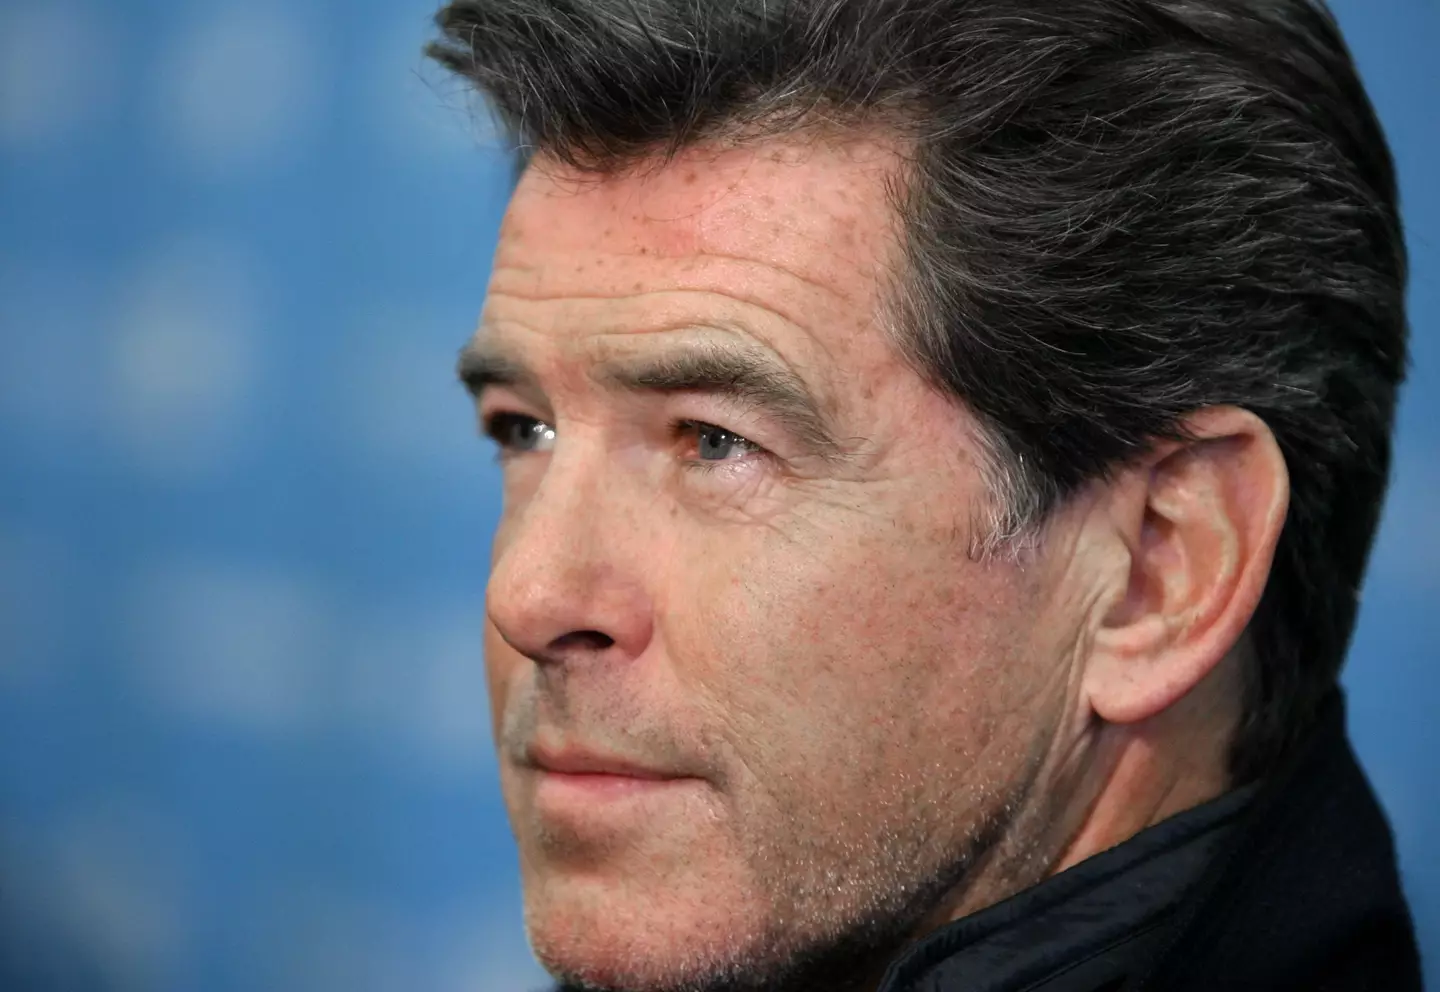 When discussing his latest film, Pierce Brosnan spoke on how he could have been Batman.